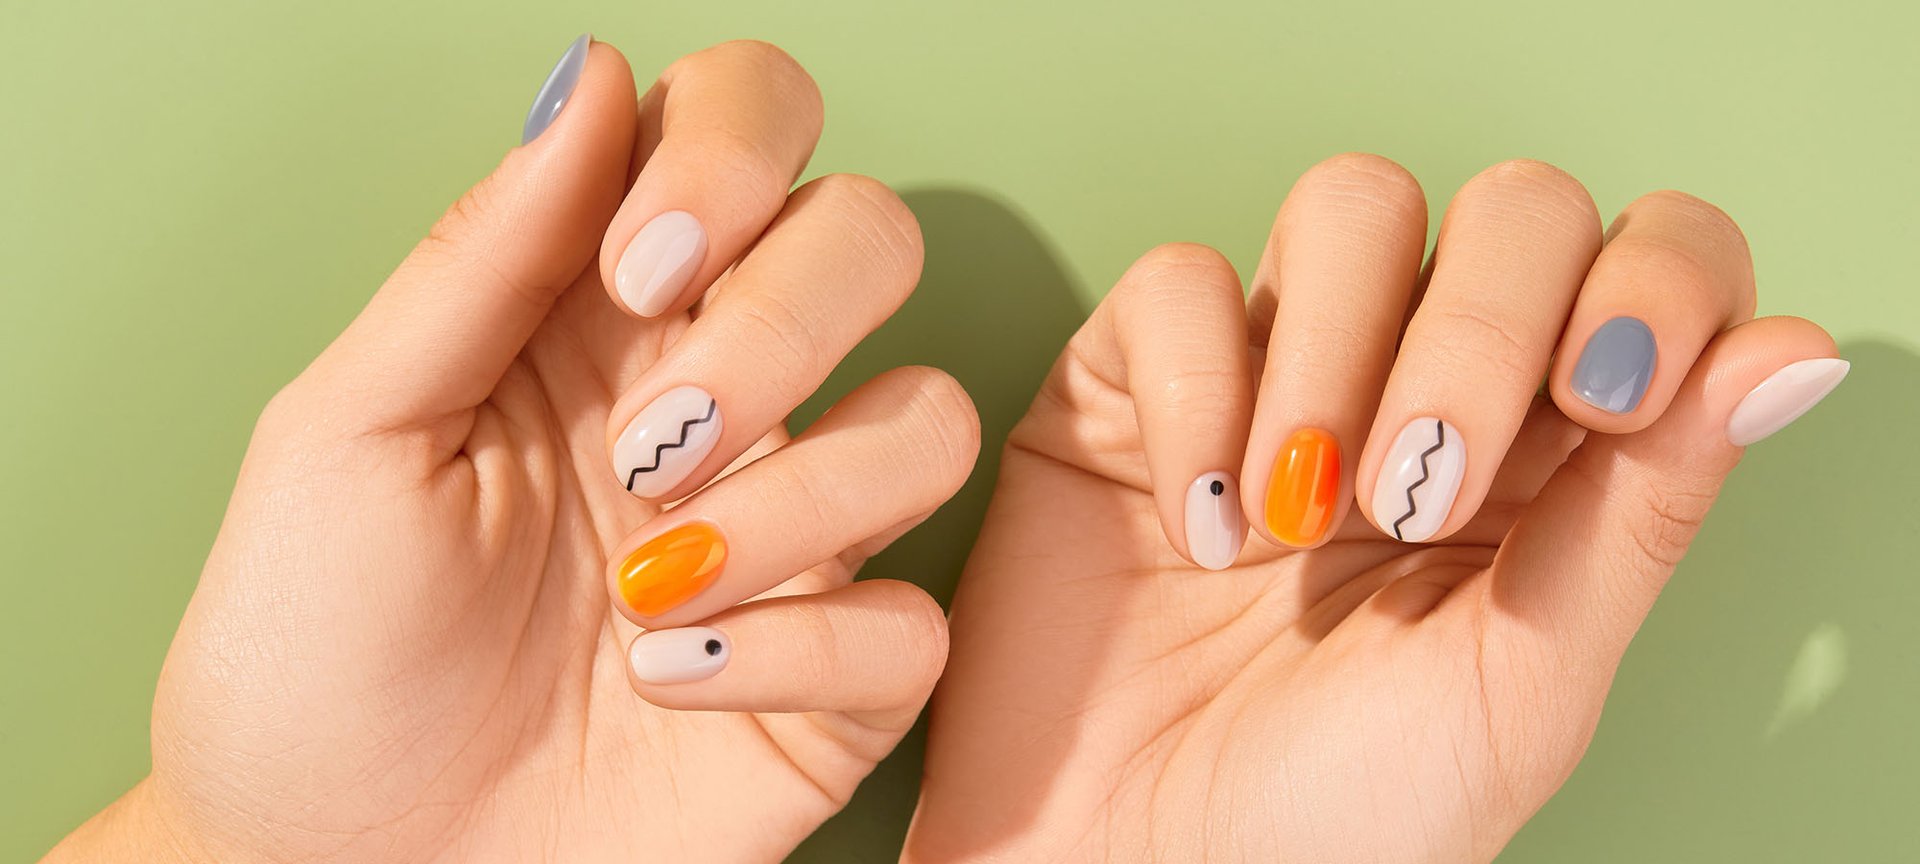 8 Nail Care Tips for Healthy, Beautiful Nails